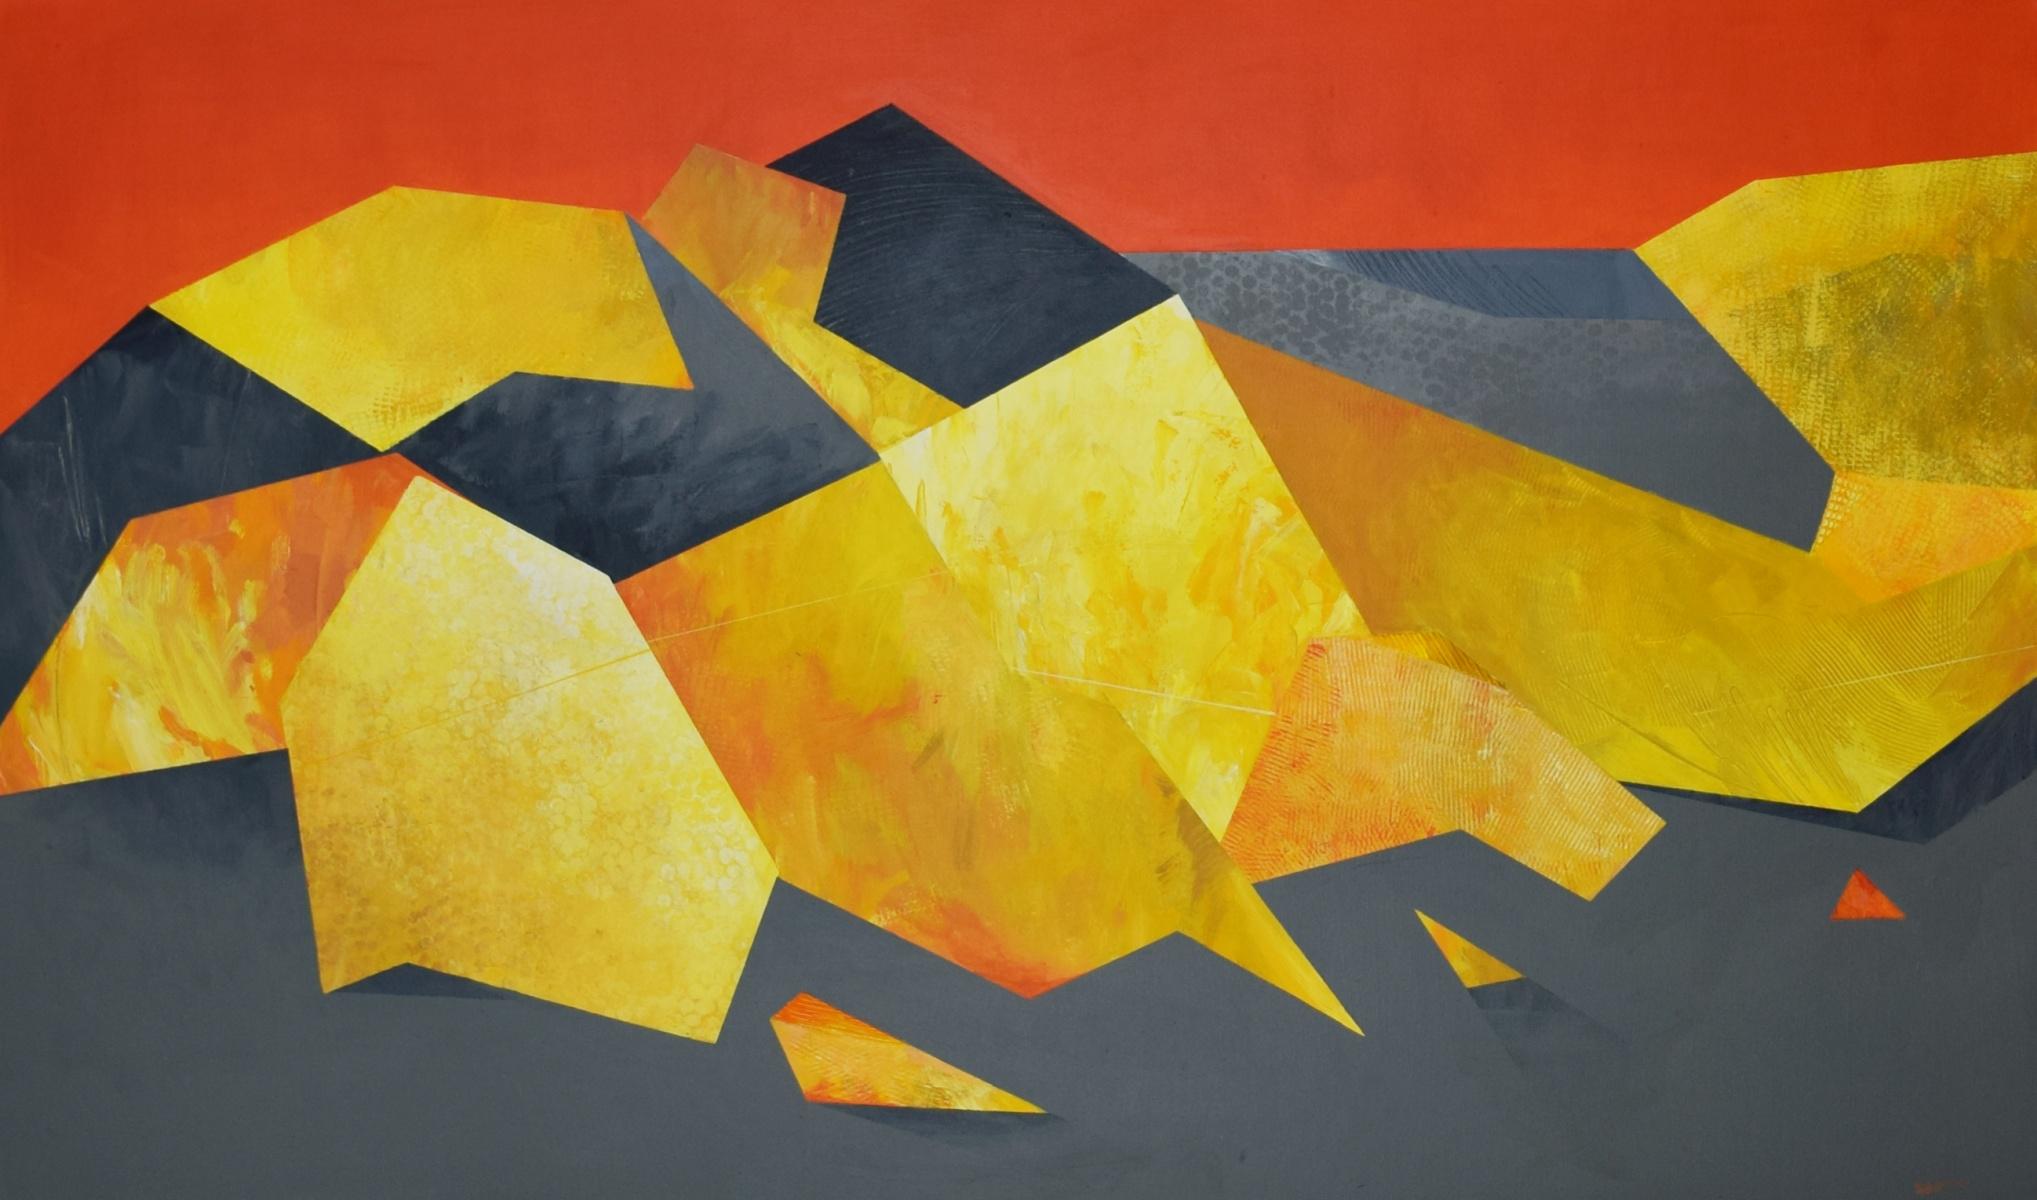 Tatra Mountains IV - Painting, Orange and  Yellow, Geometric Abstract landscape